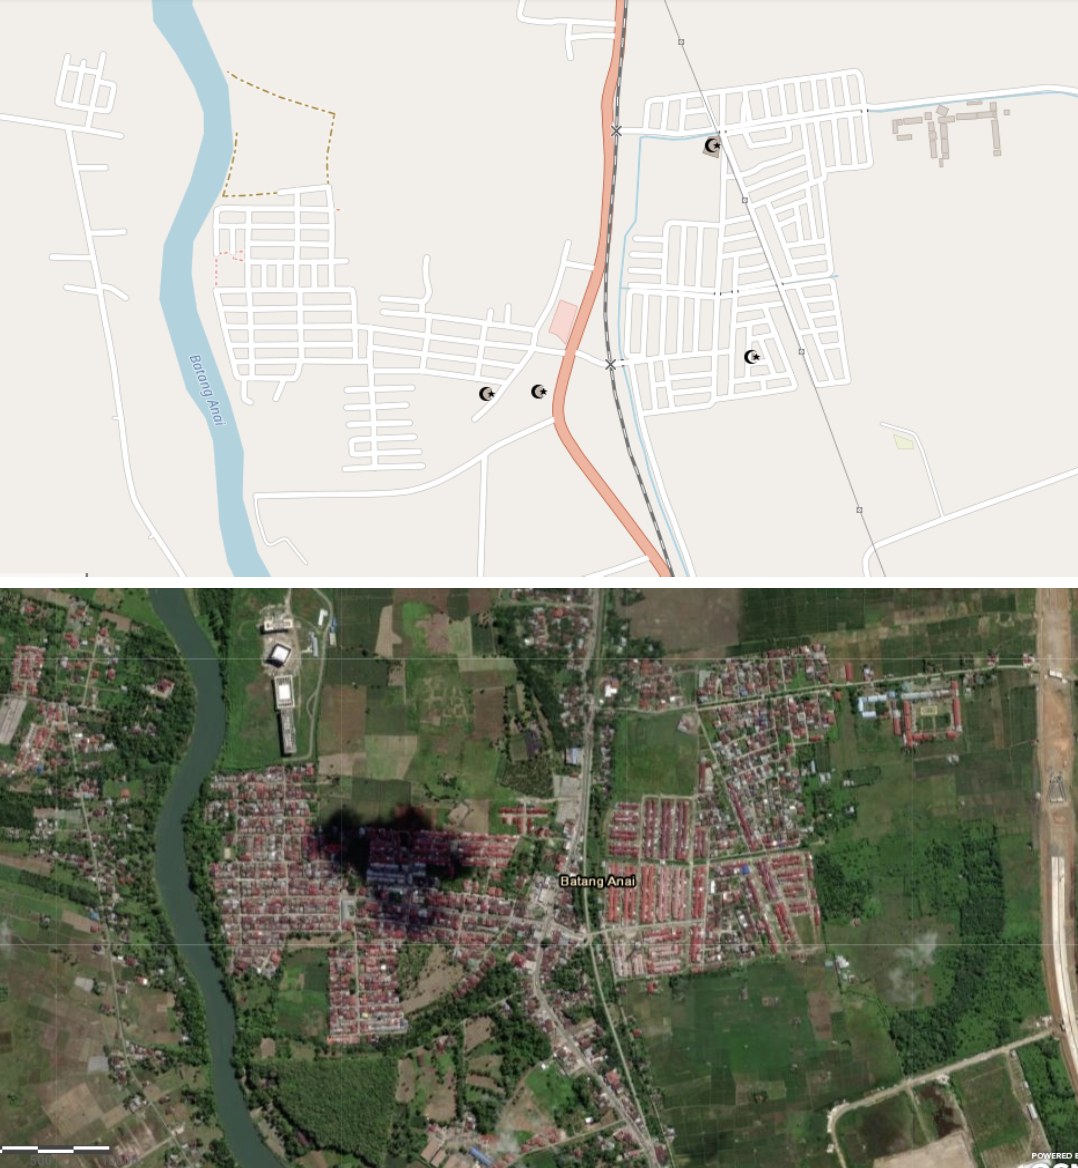 Area mapped by students on satellite imagery and in OpenStreetMap